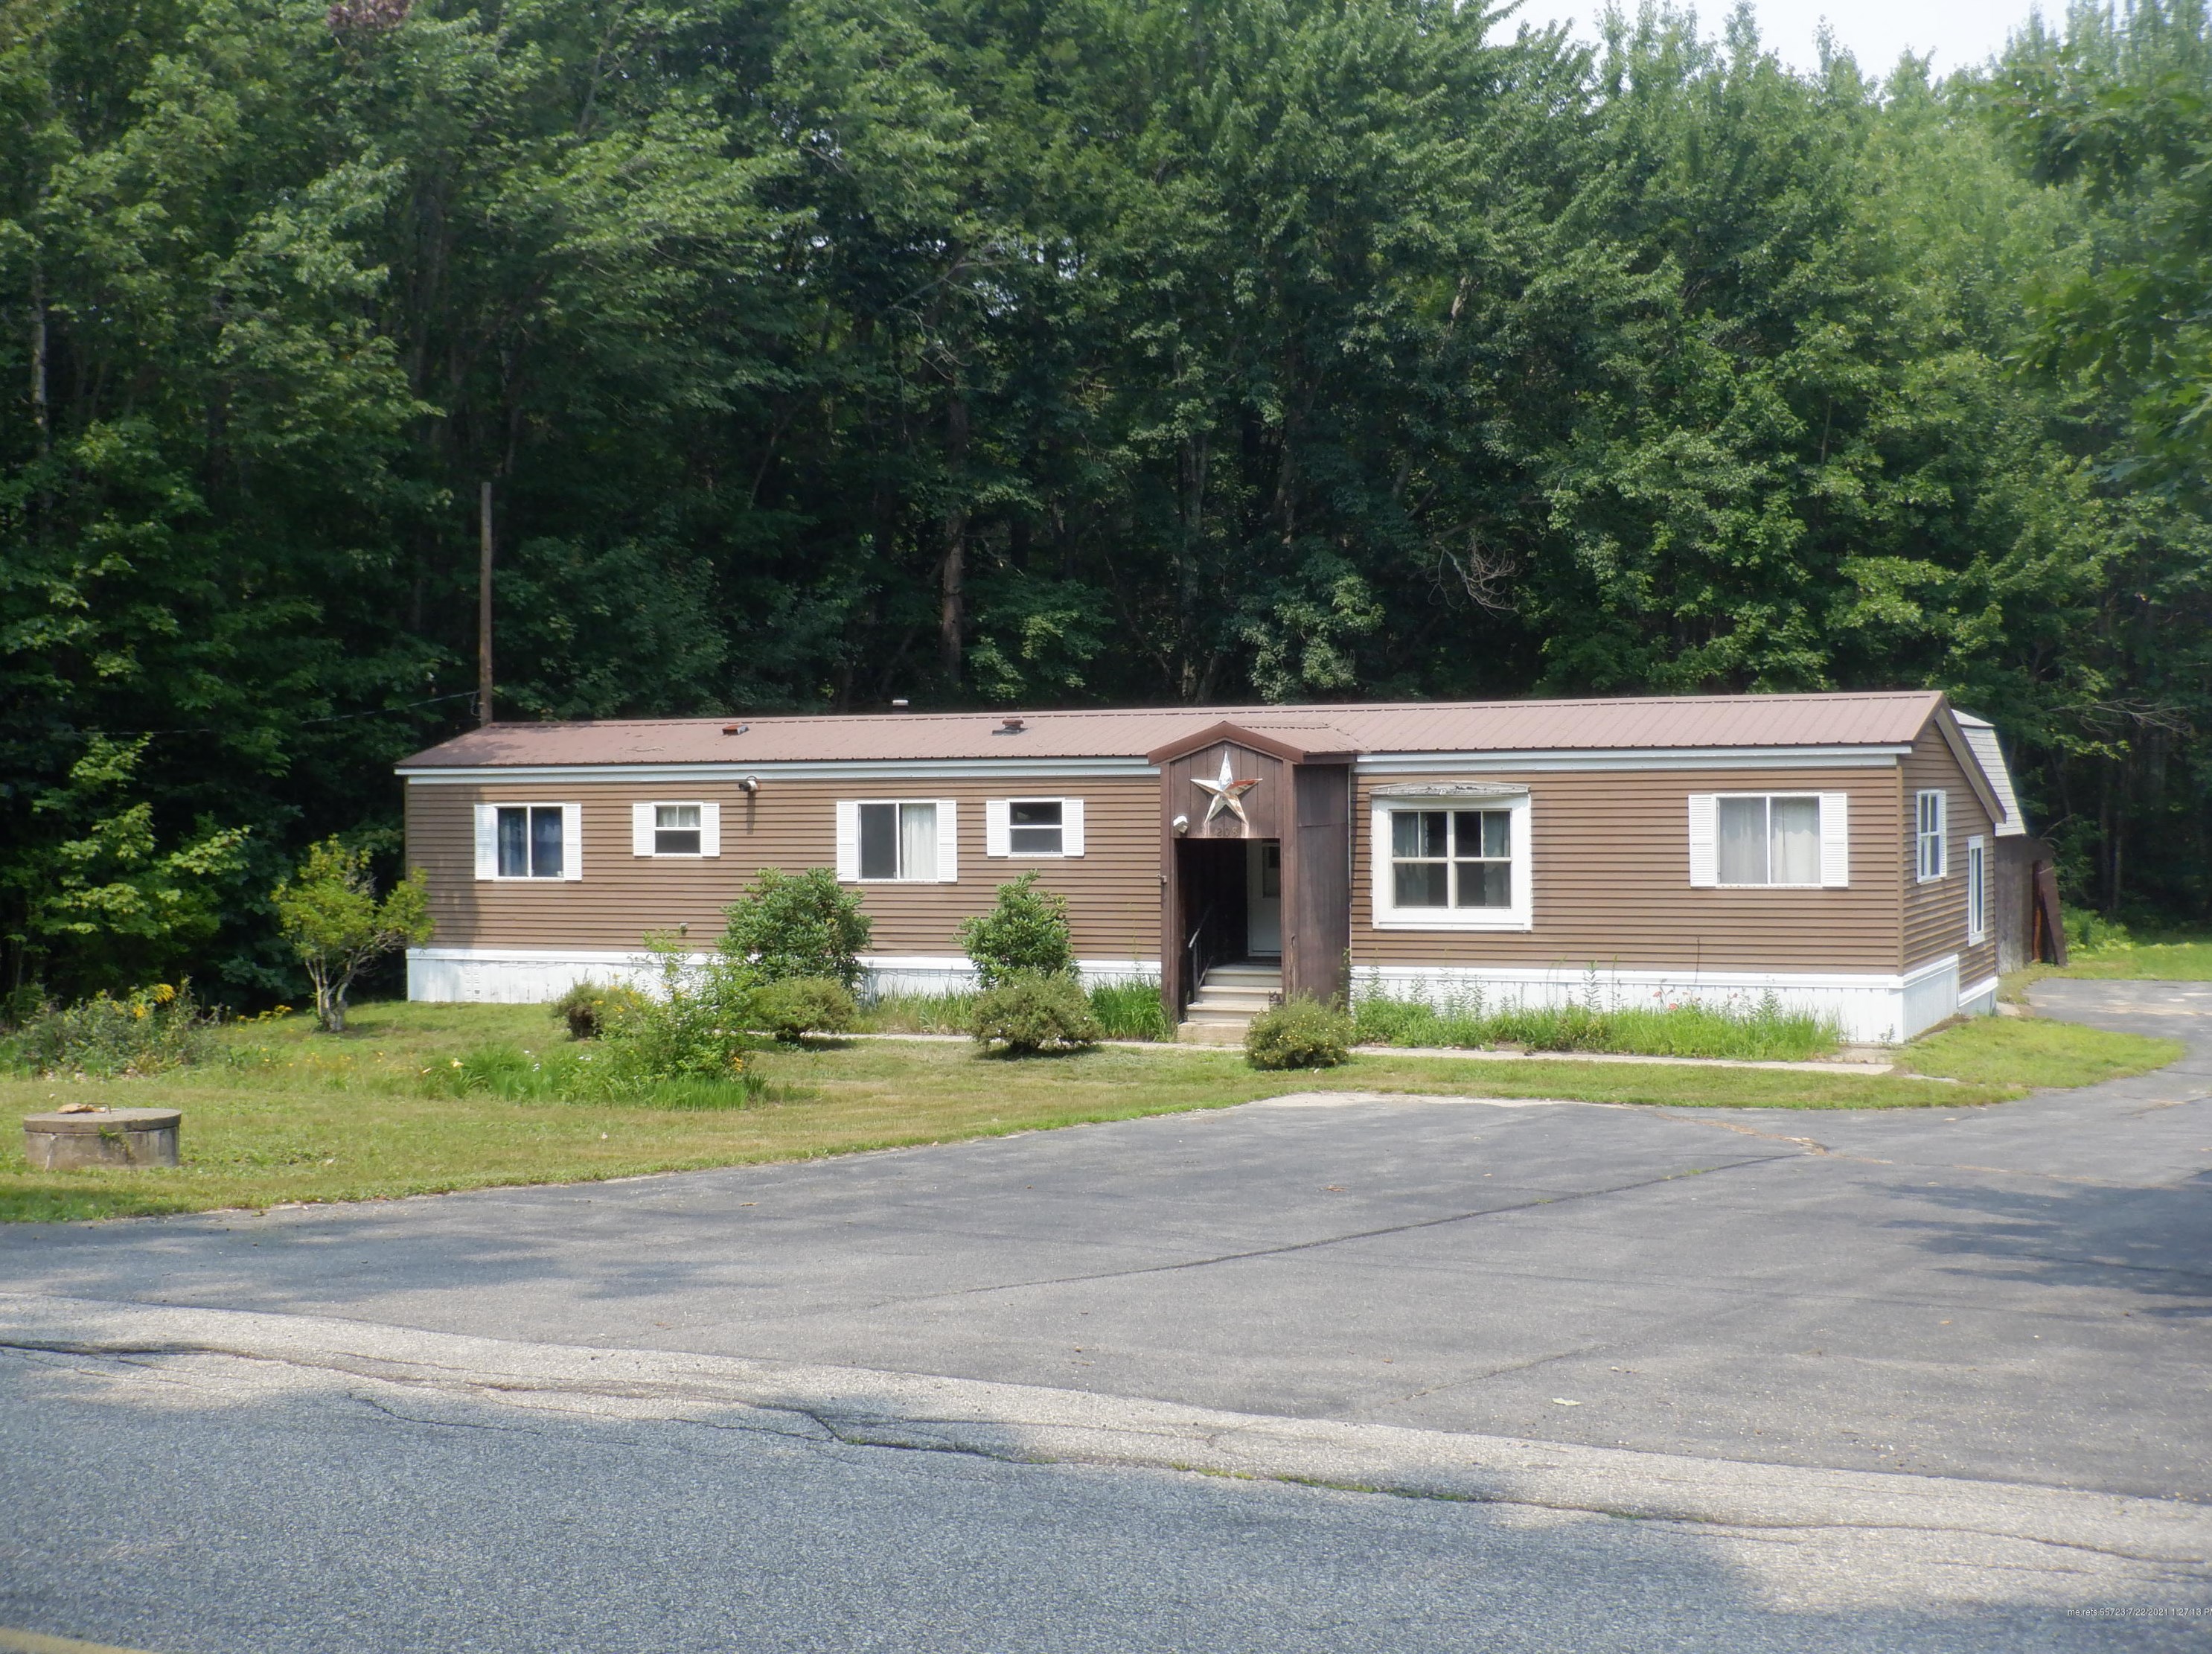 208 Old Orchard Rd, West Buxton, ME 04093 exterior